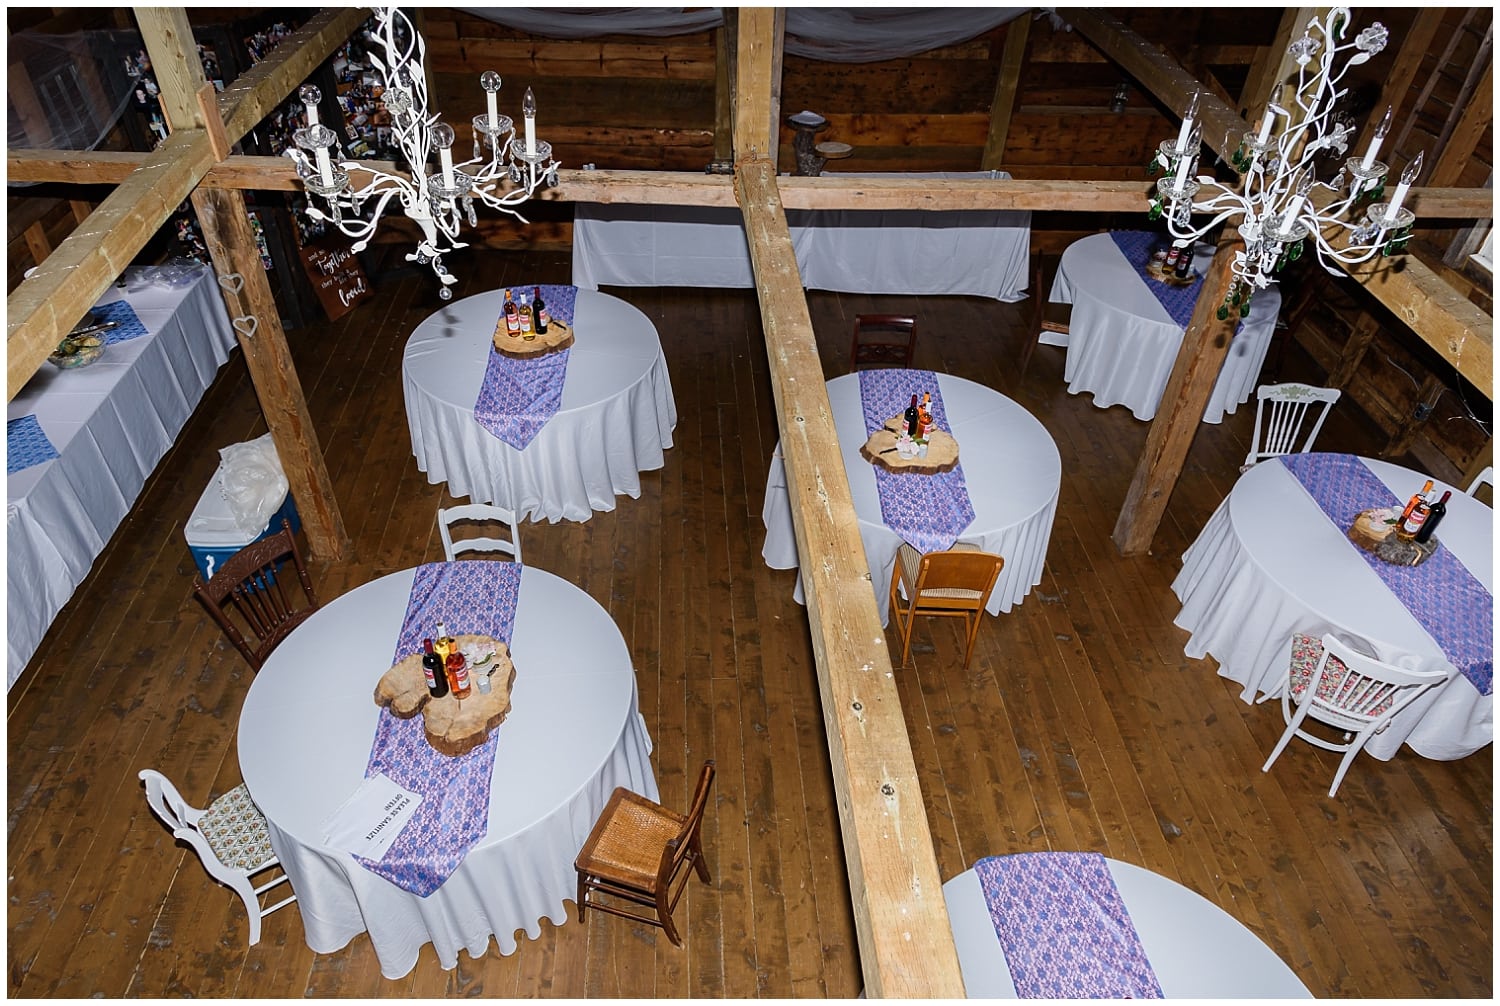 A rustic wedding reception set up for a wedding at the Barn at Sadie Belle Farm in Hantsport NS.